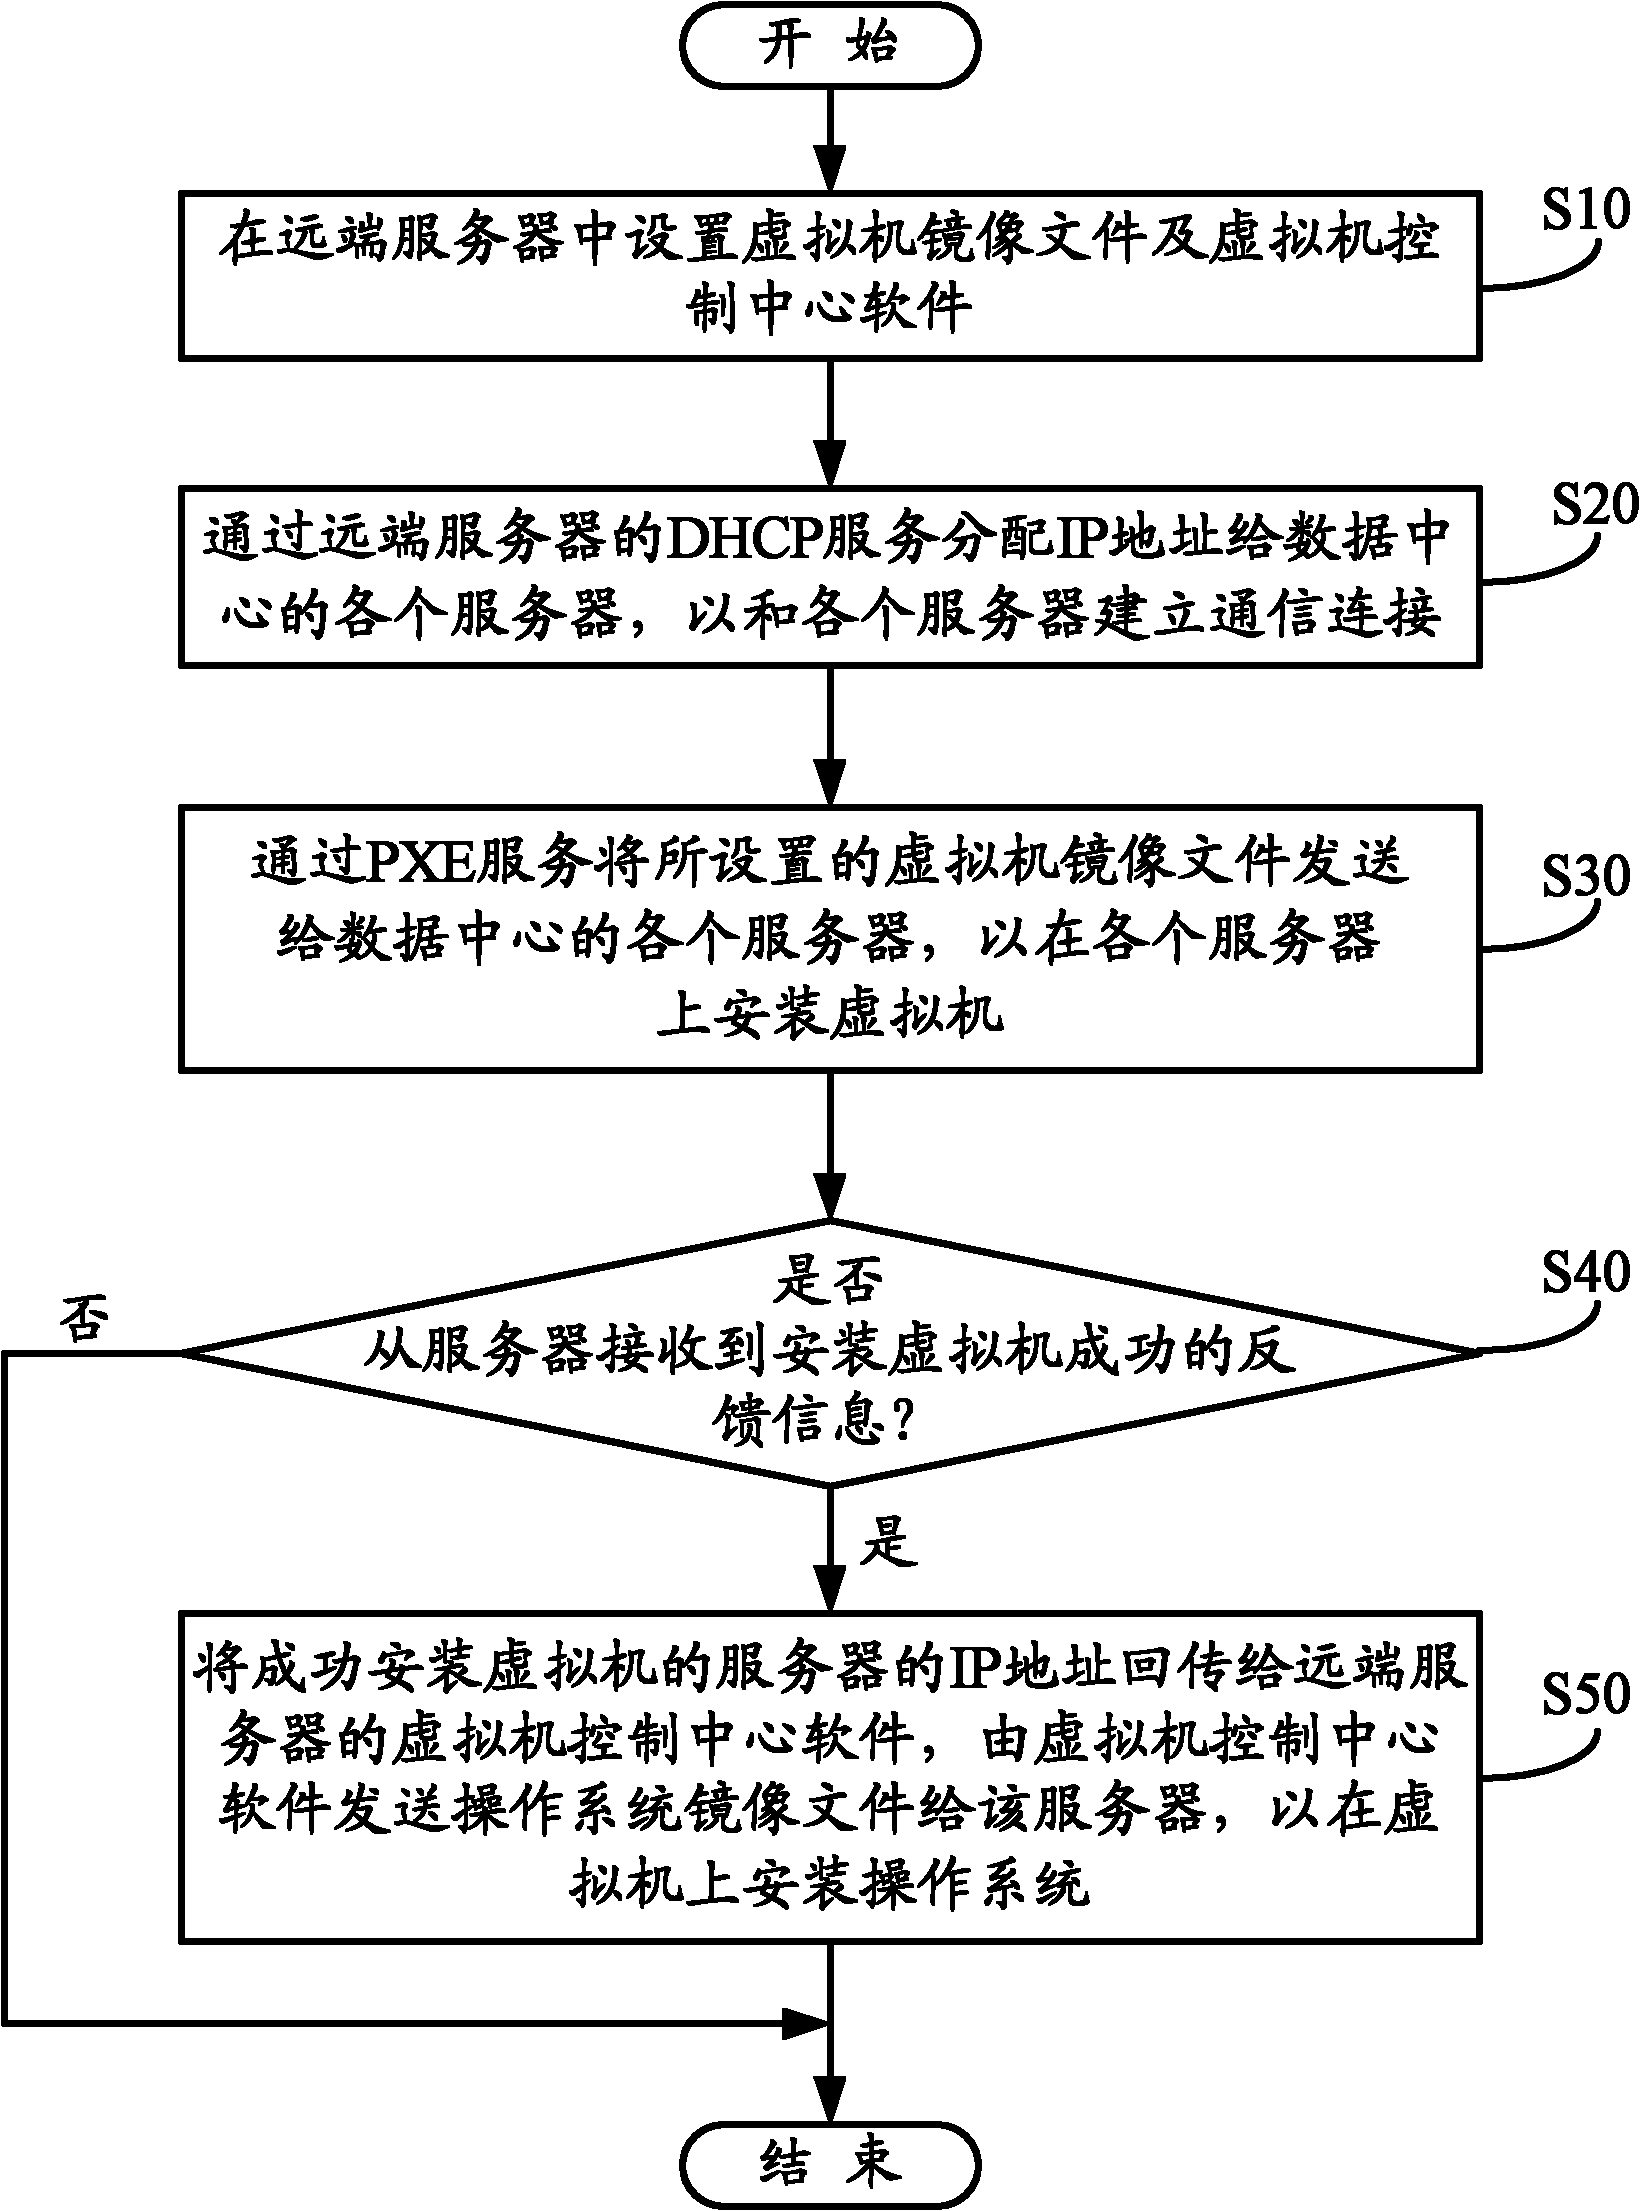 Virtual machine mounting system and method